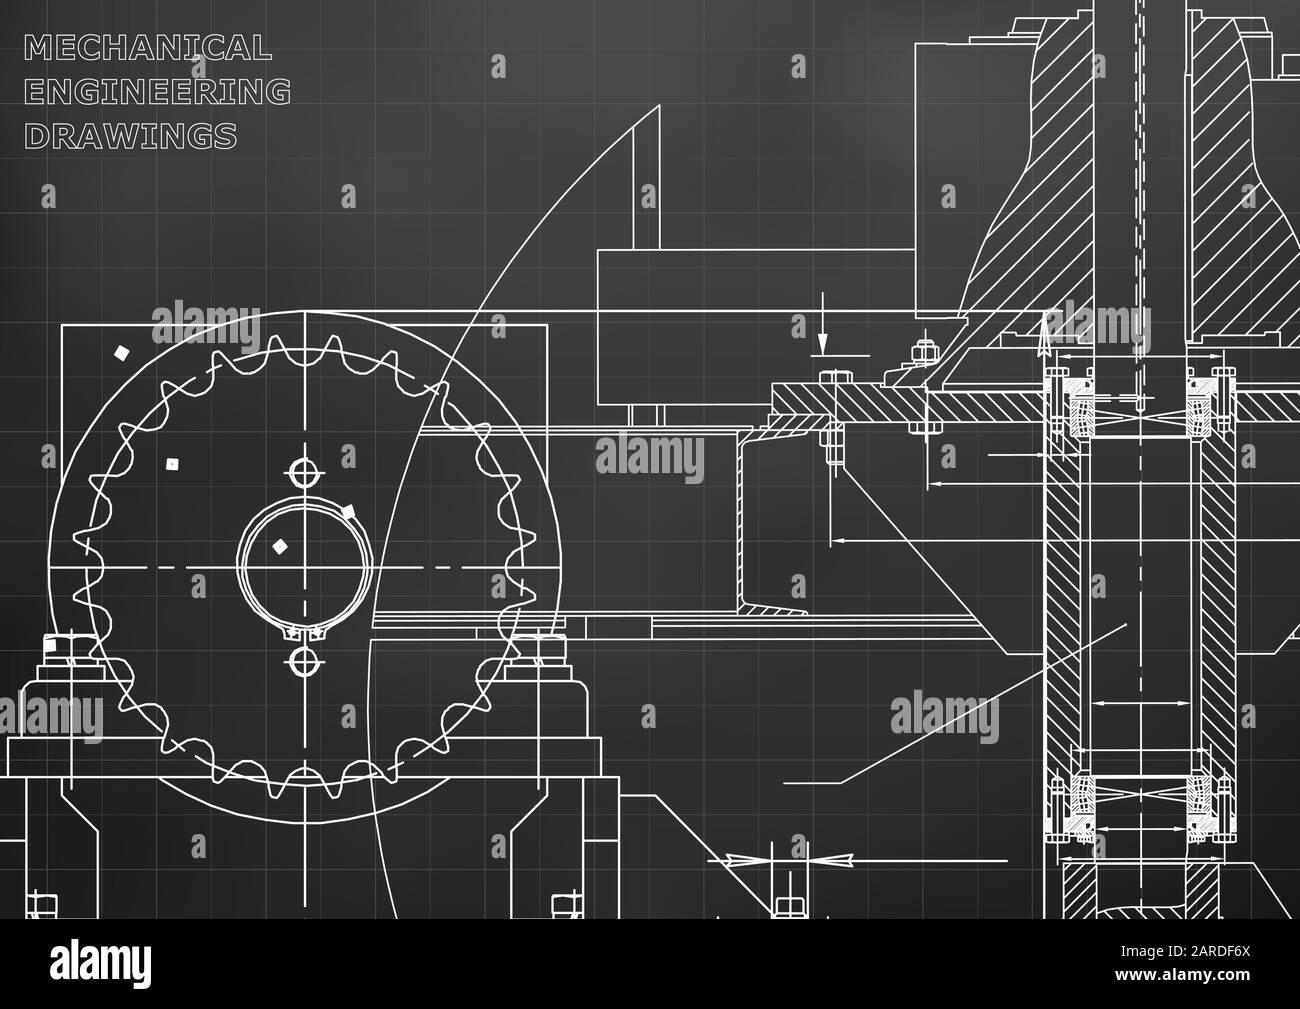 Blueprints. Engineering backgrounds. Mechanical engineering drawings. Cover. Technical Design. Black. Grid Stock Vector